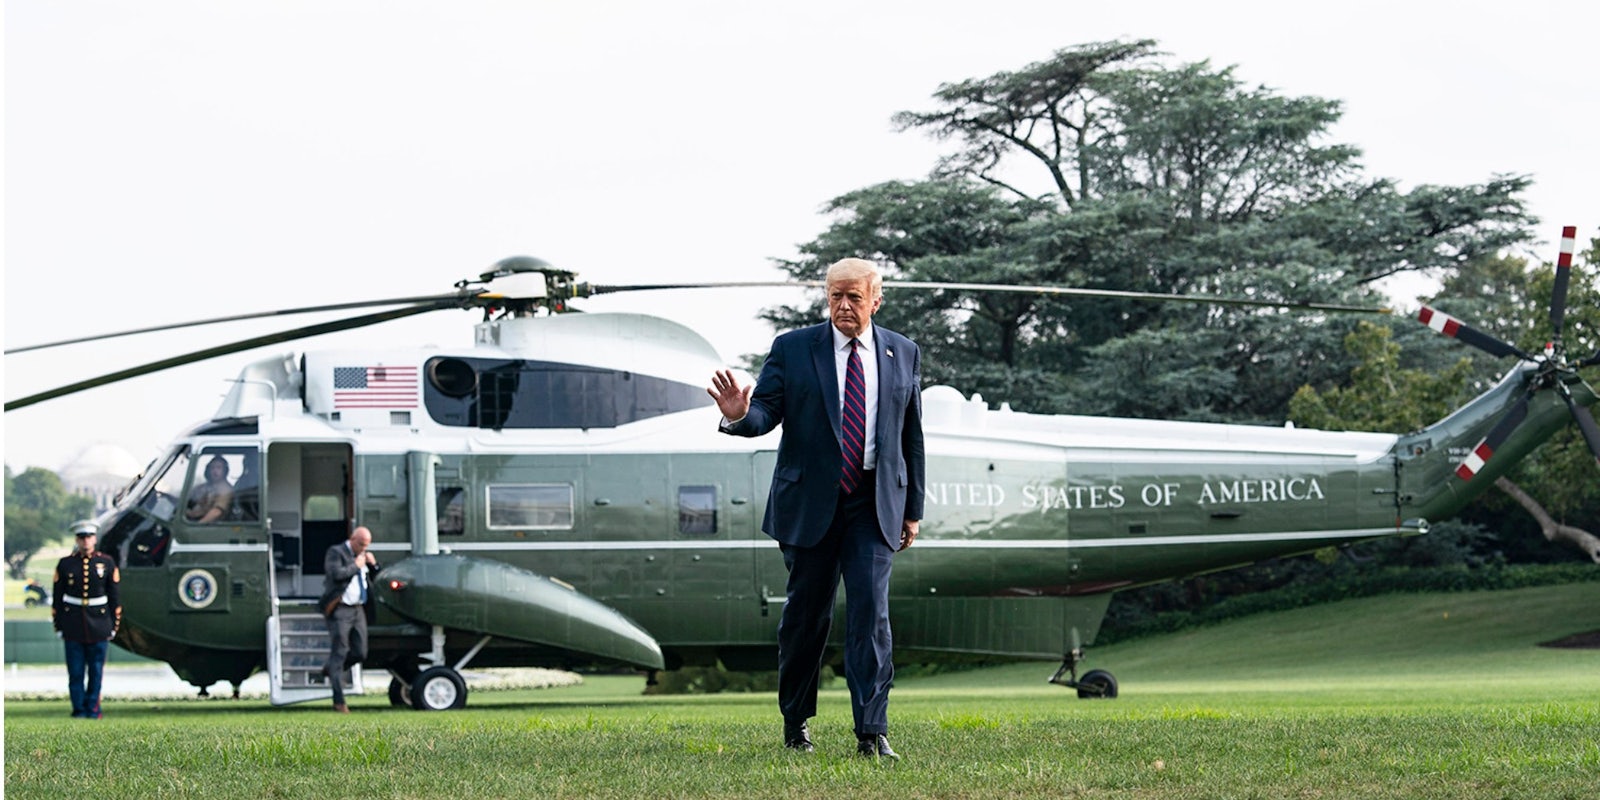 Donald Trump walking away from a helicopter